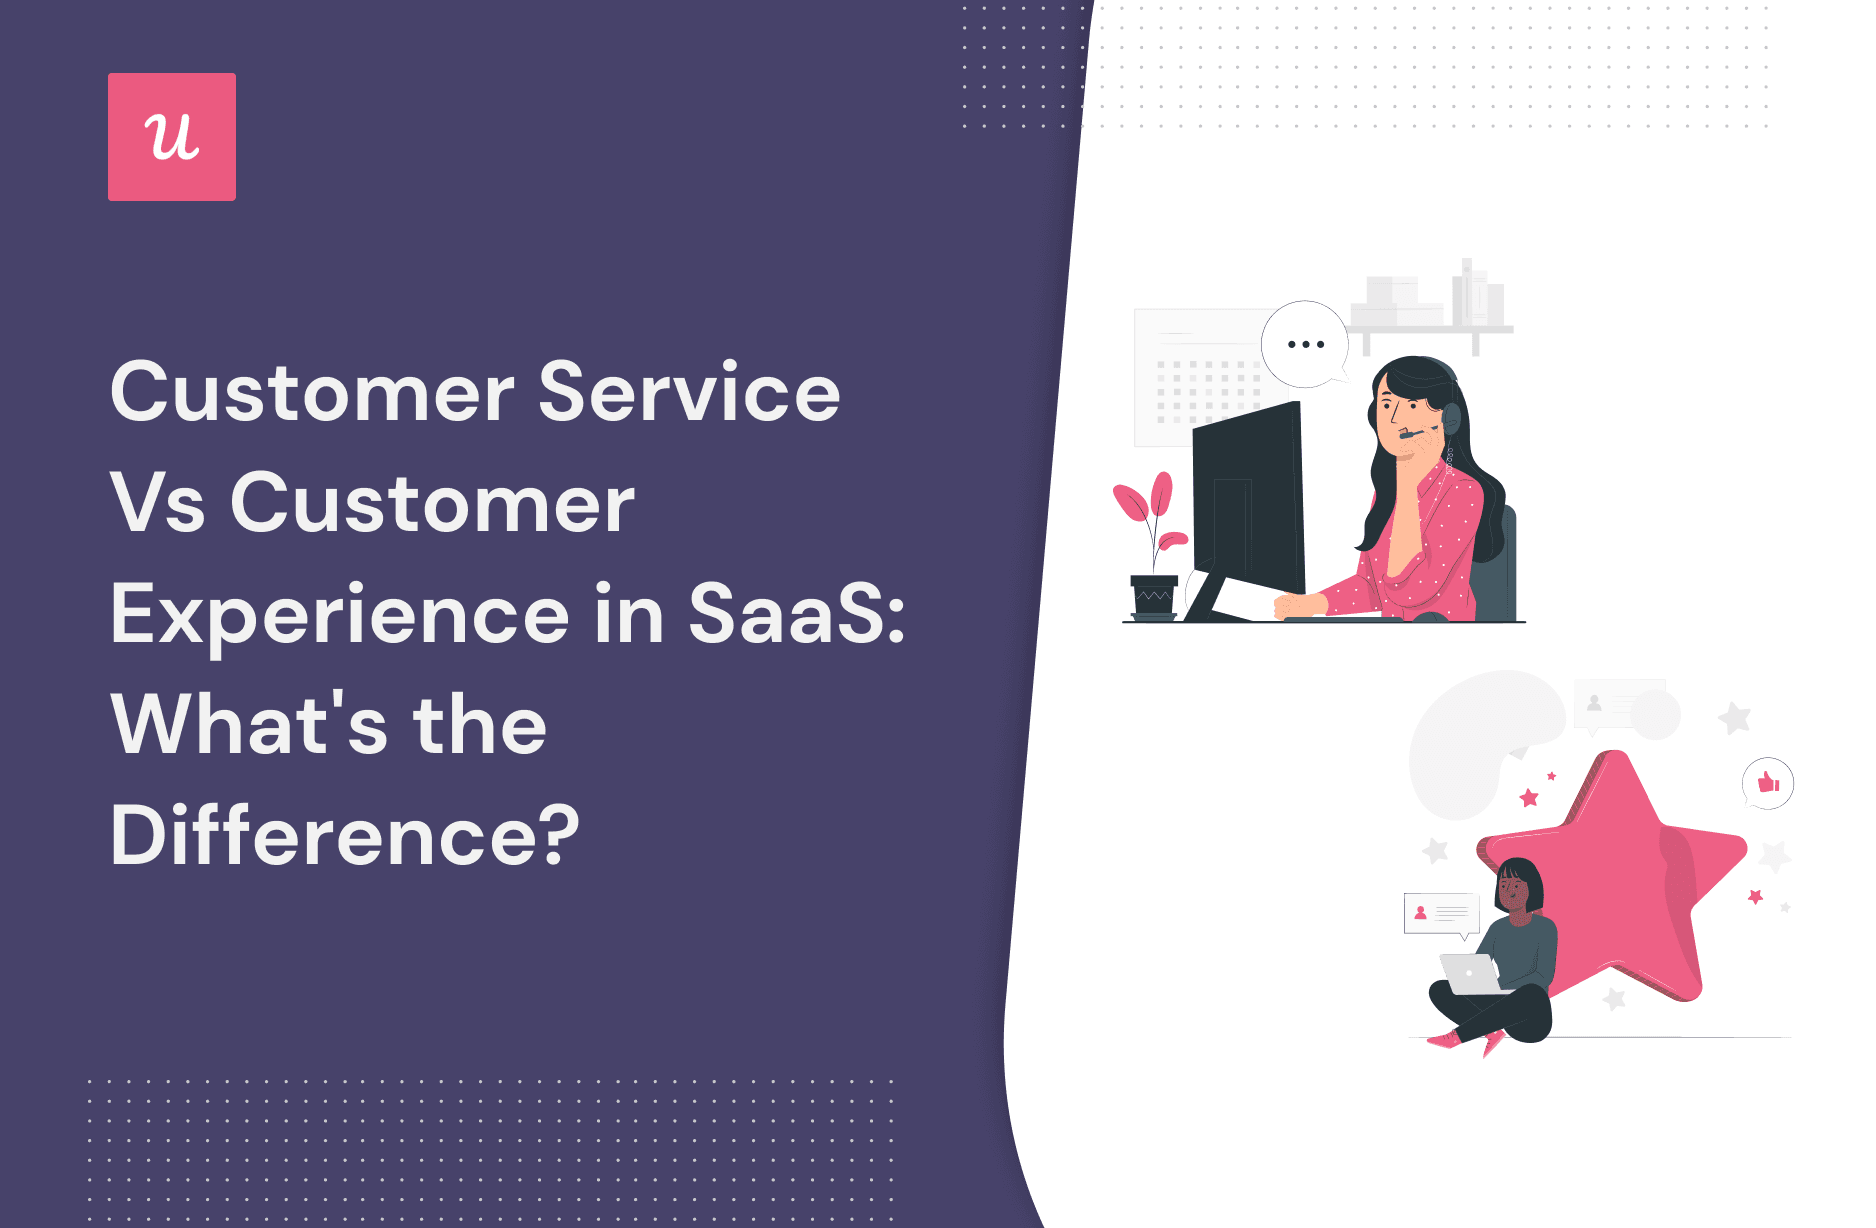 Customer Service vs Customer Experience in SaaS: What's The Difference?